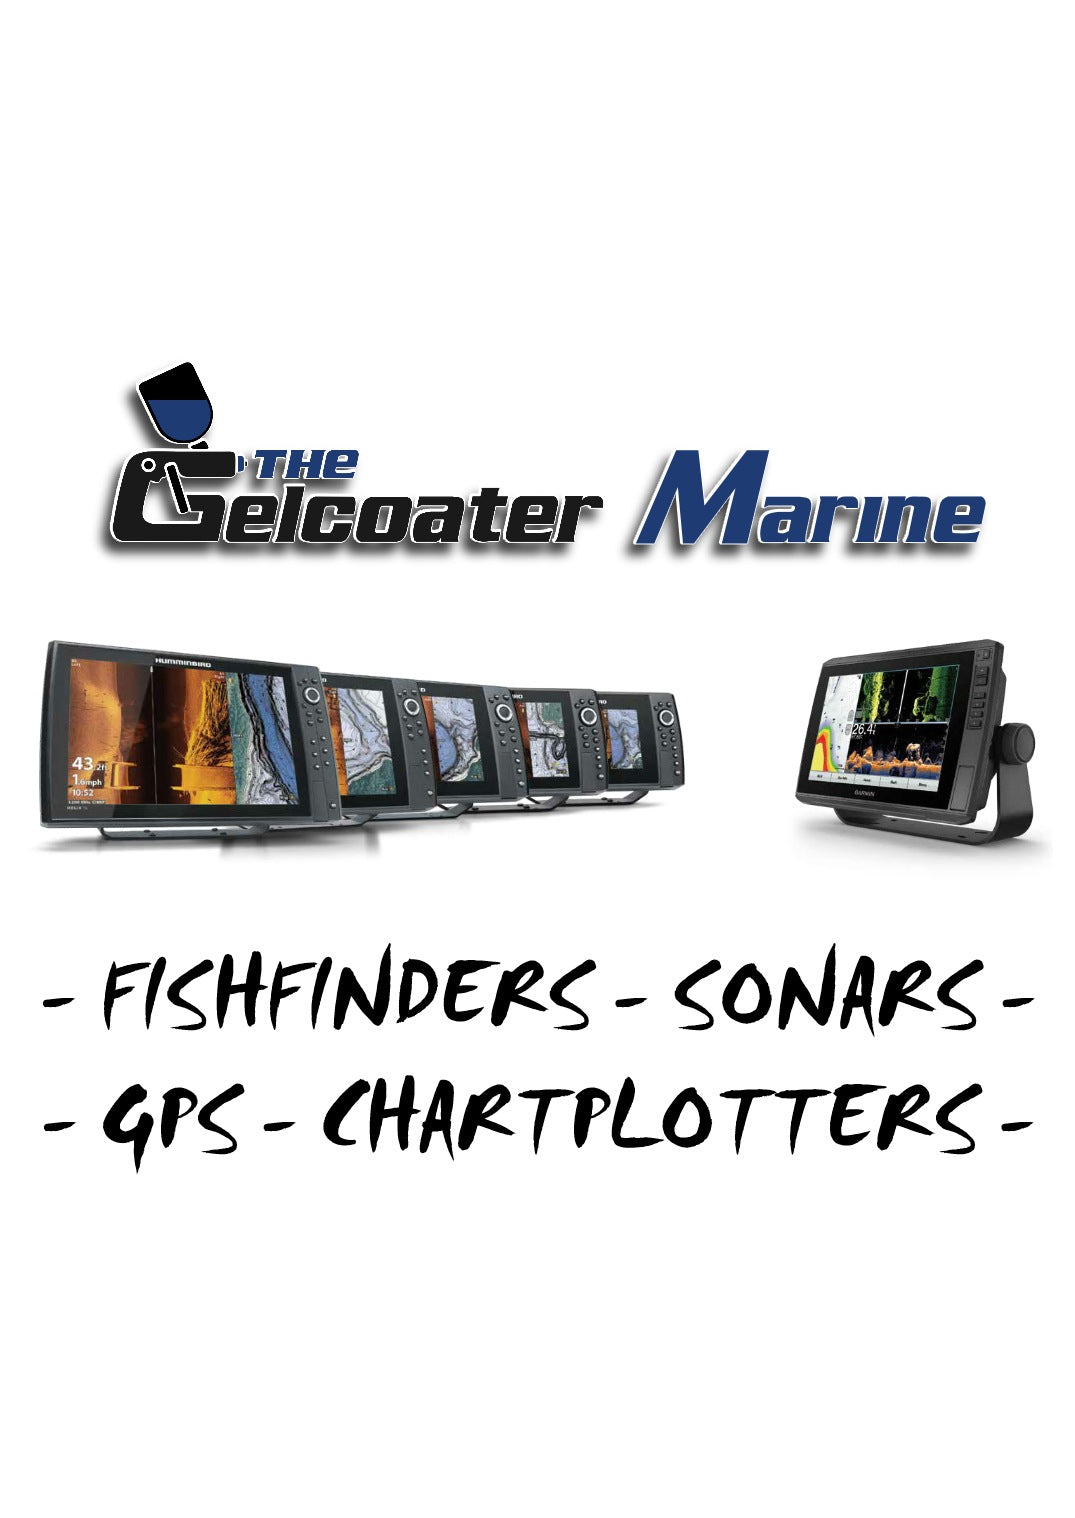 the gelcoater marine logo with 6 fishfinders